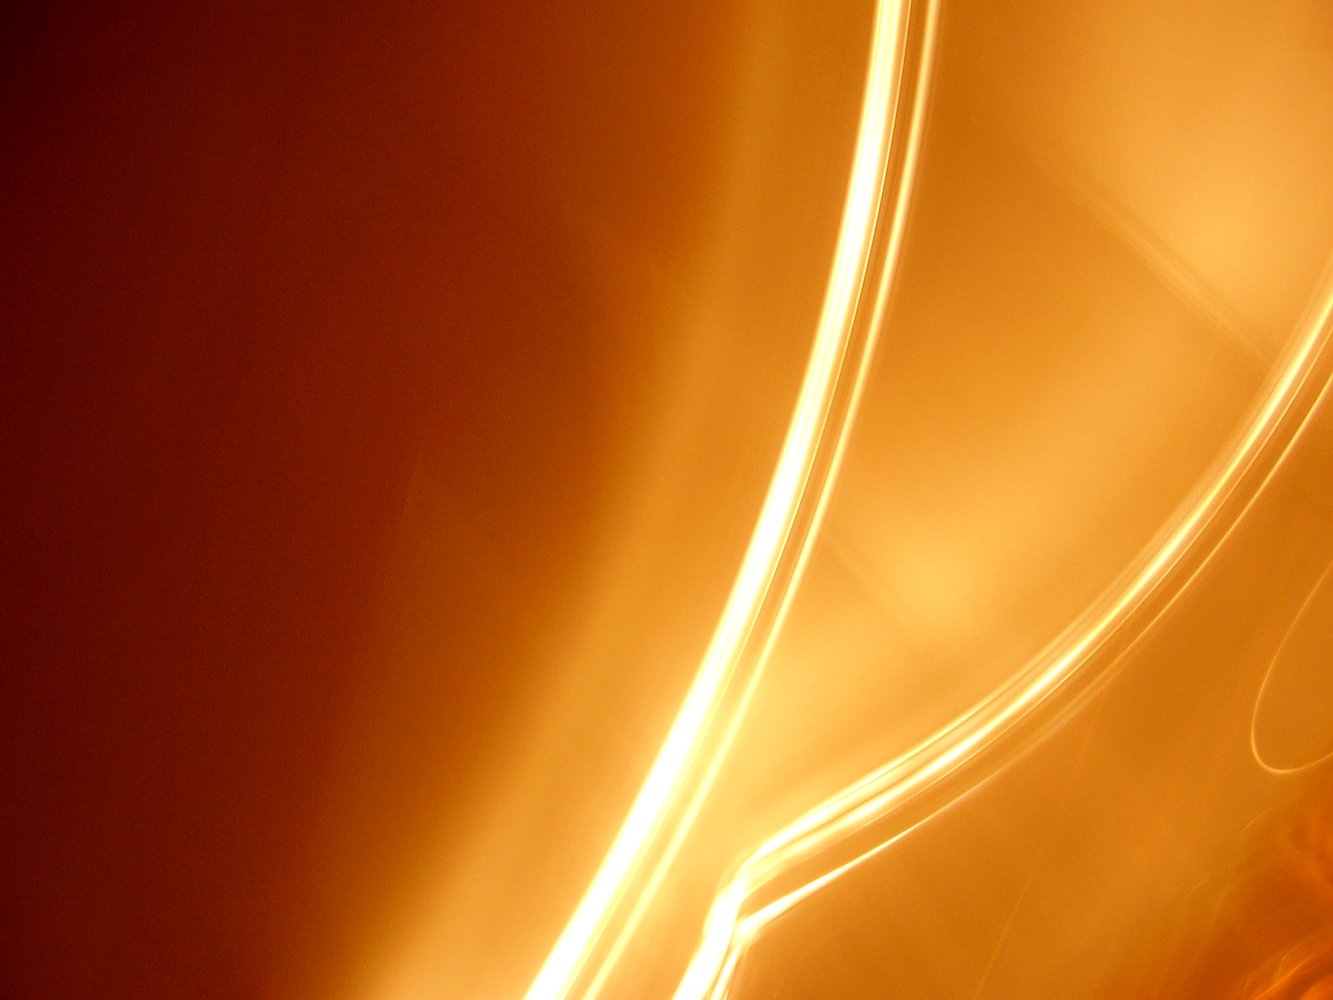 light streaks are arranged in an orange and white background